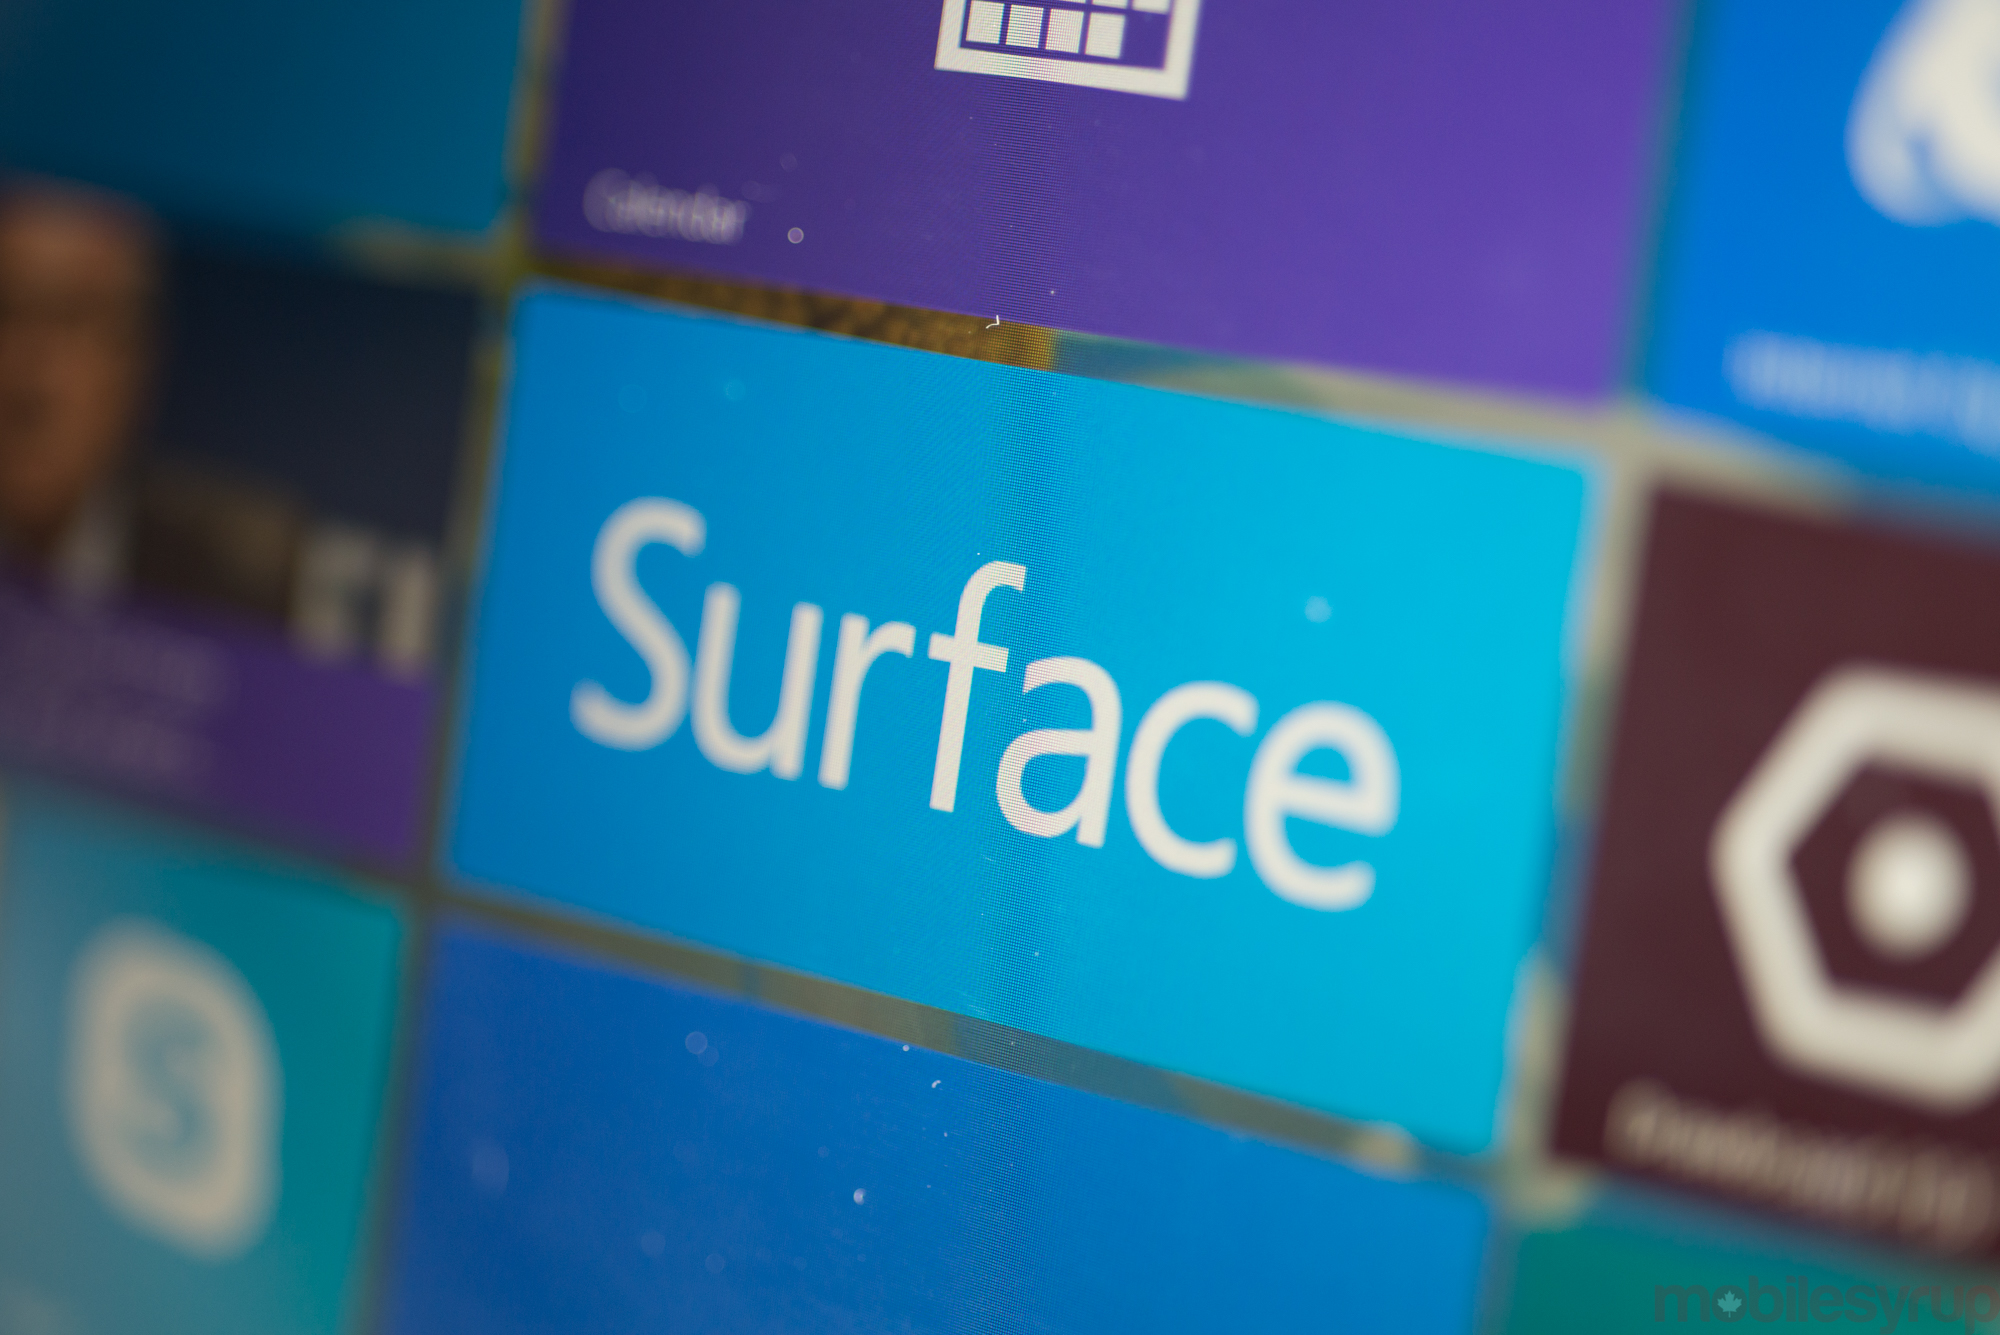 surface3review-5989